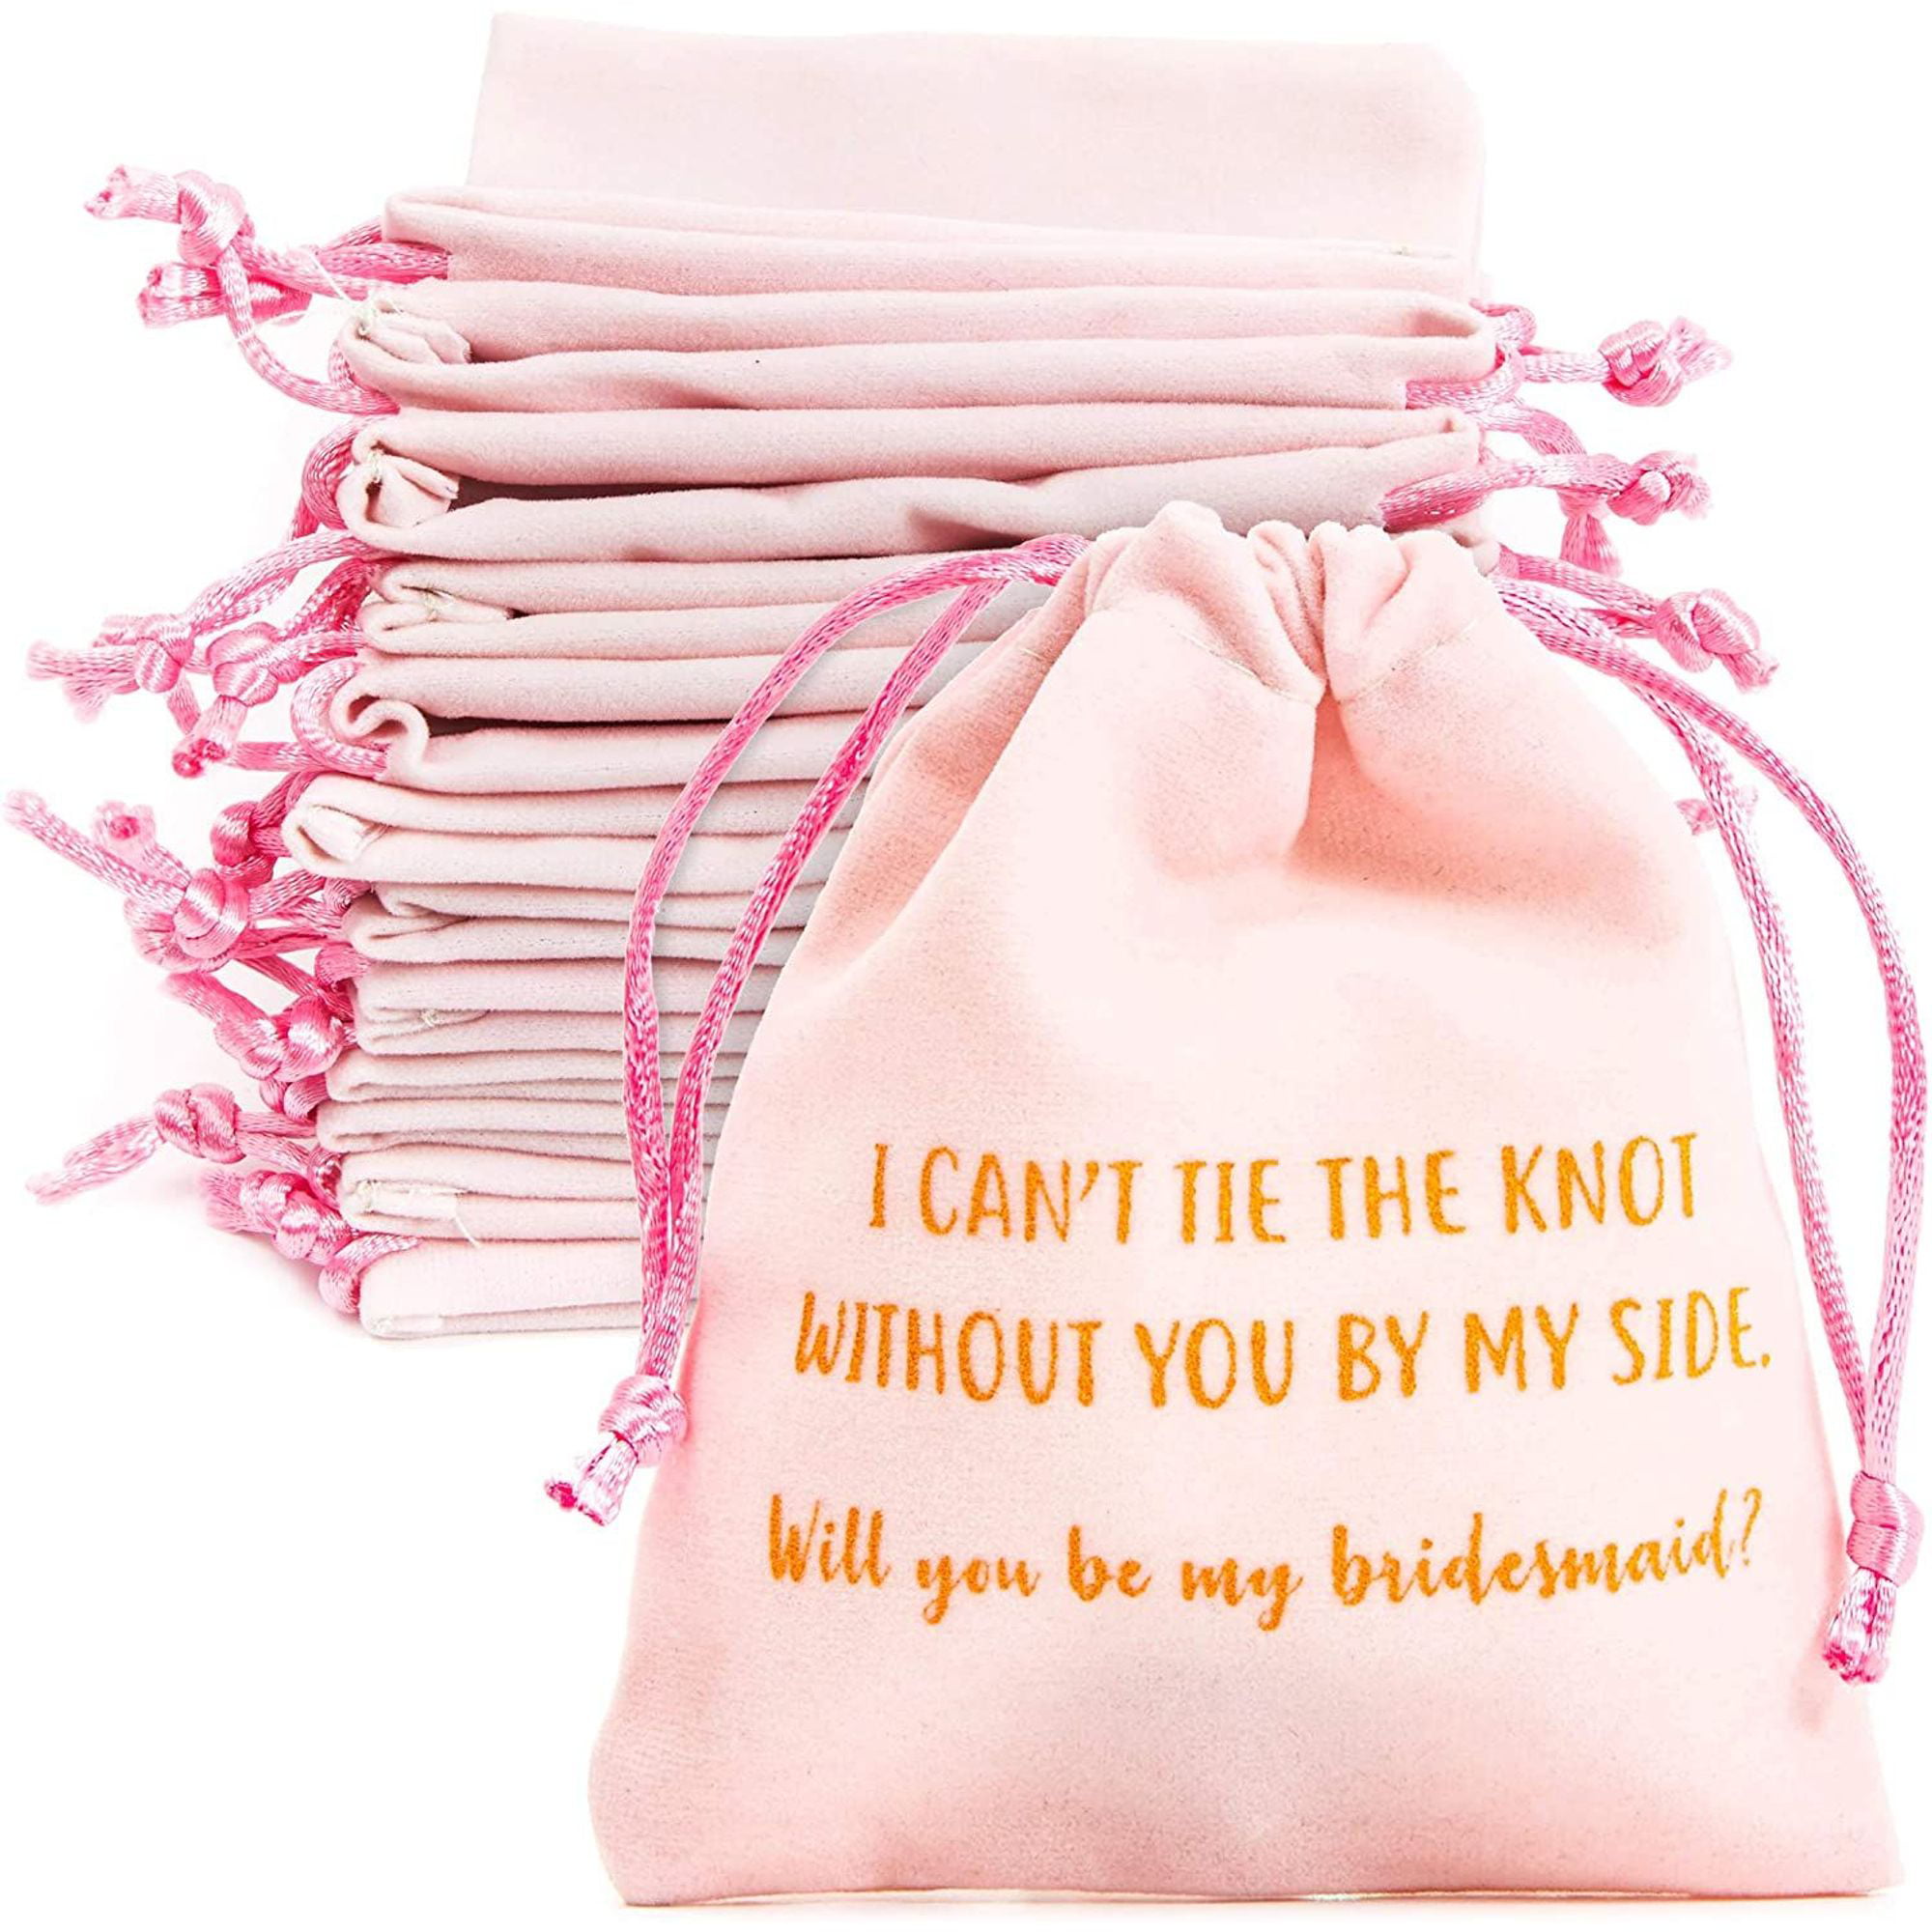 Bachelorette Party Hangover Kit Bags Bride Tribe Bridal Wedding Favor Gifts Bags